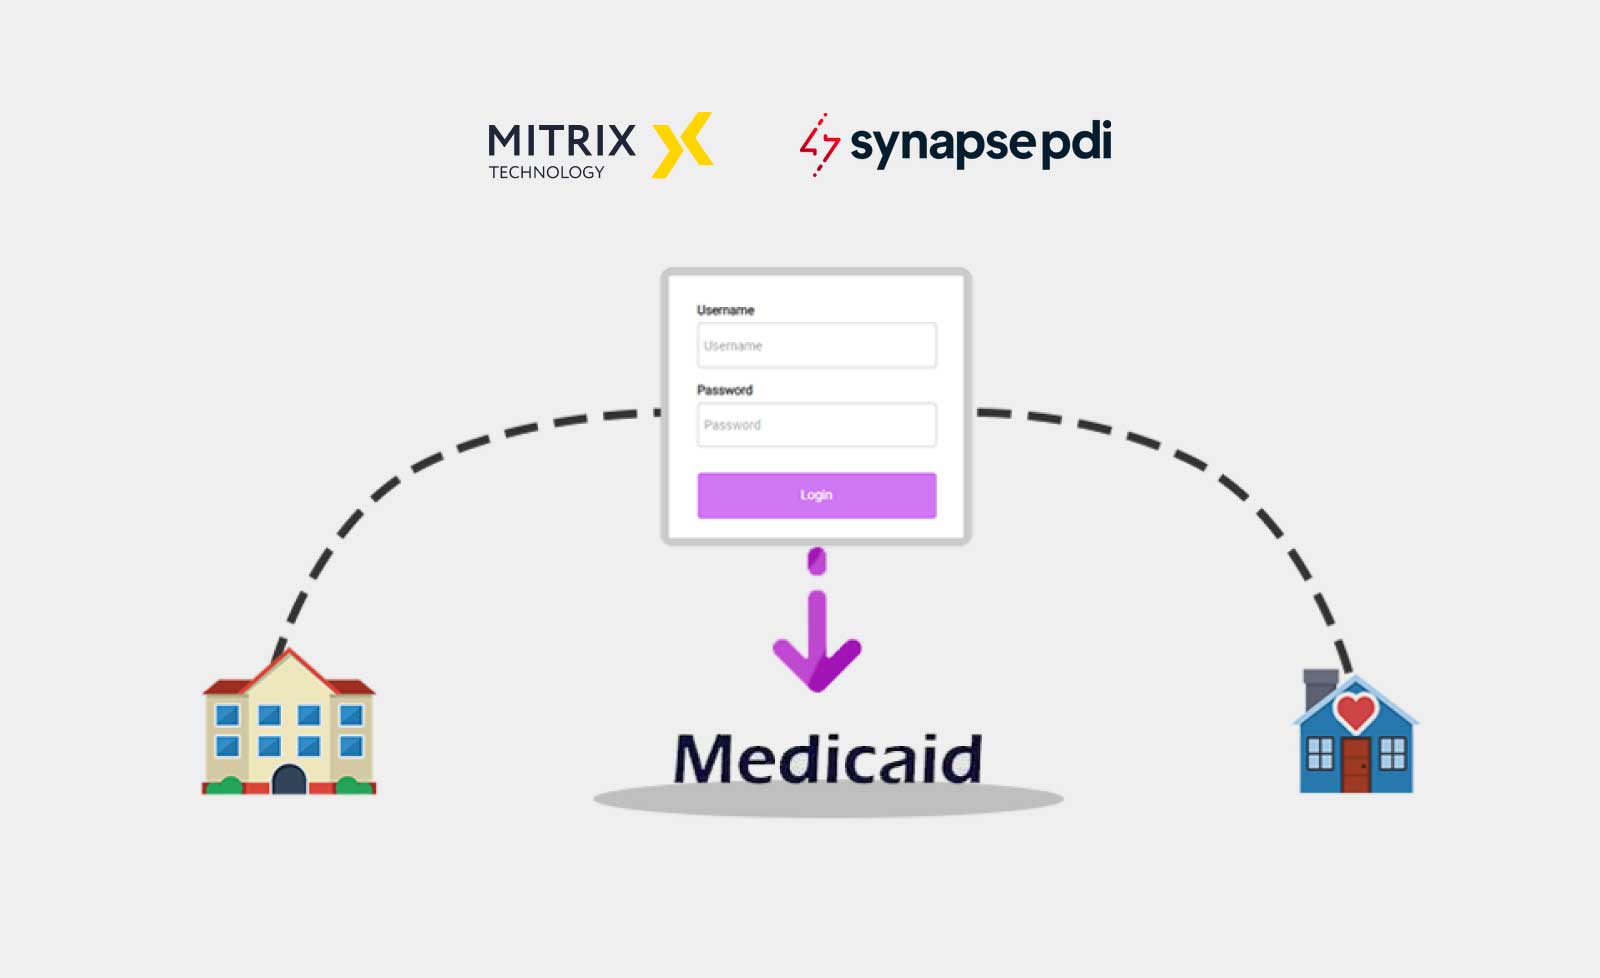 One shared platform to control hospice Medicaid room and board payments